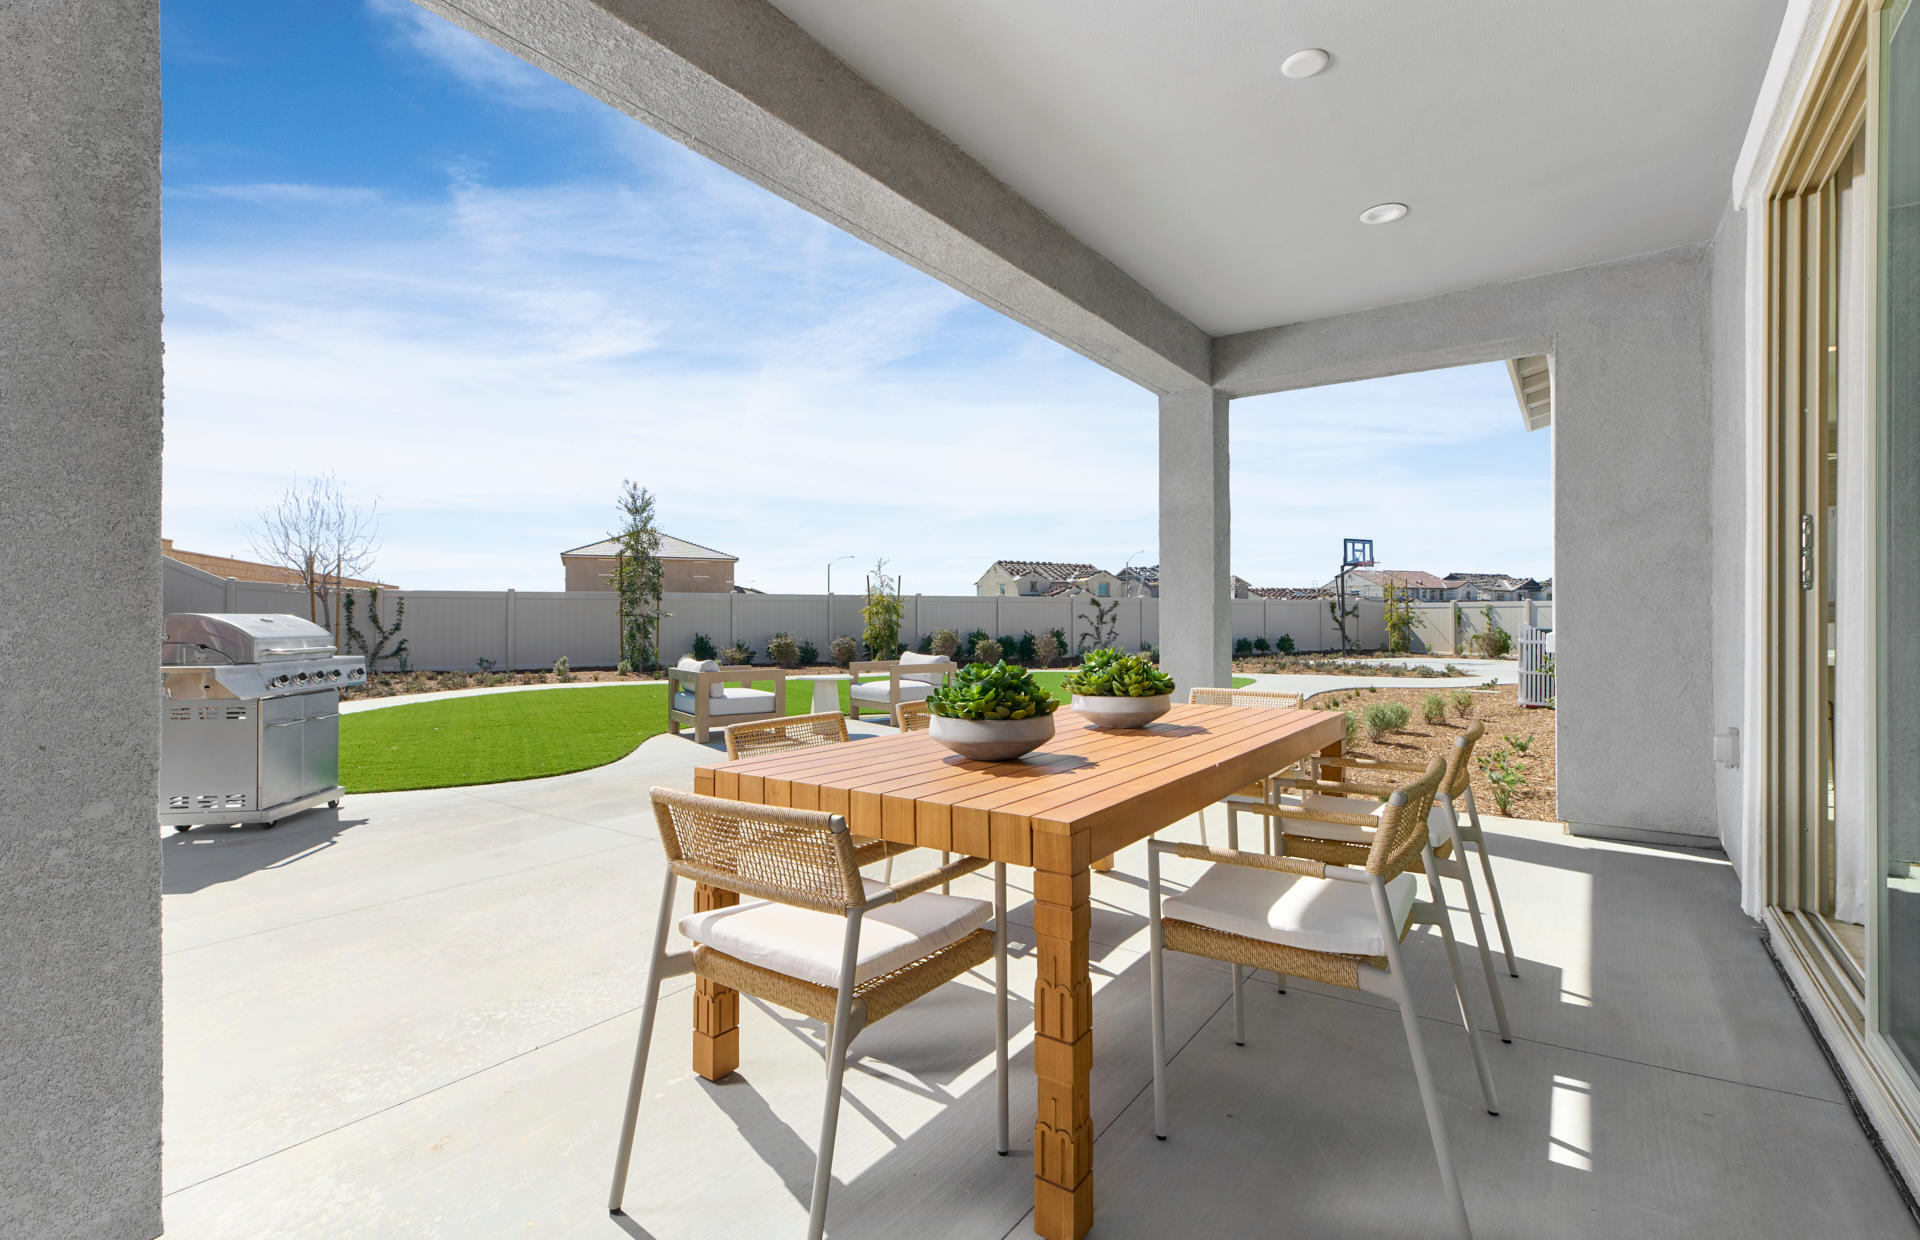 Image 5 | Fairway at Stratford Place by Pulte Homes